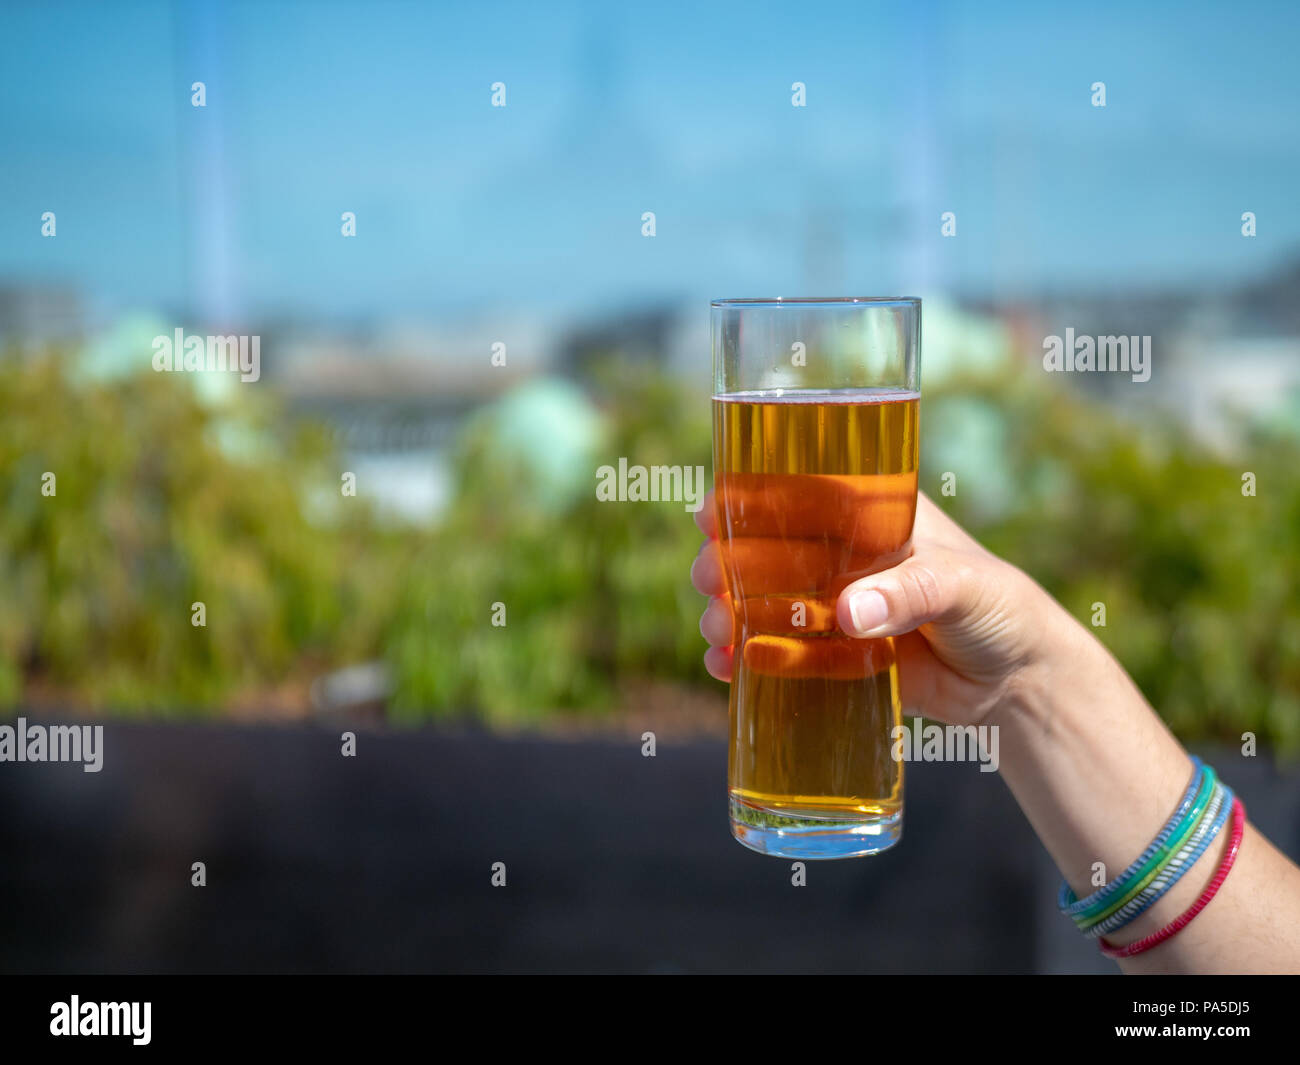 Hand holding glass of beer on a sunny day in festive setting Stock Photo